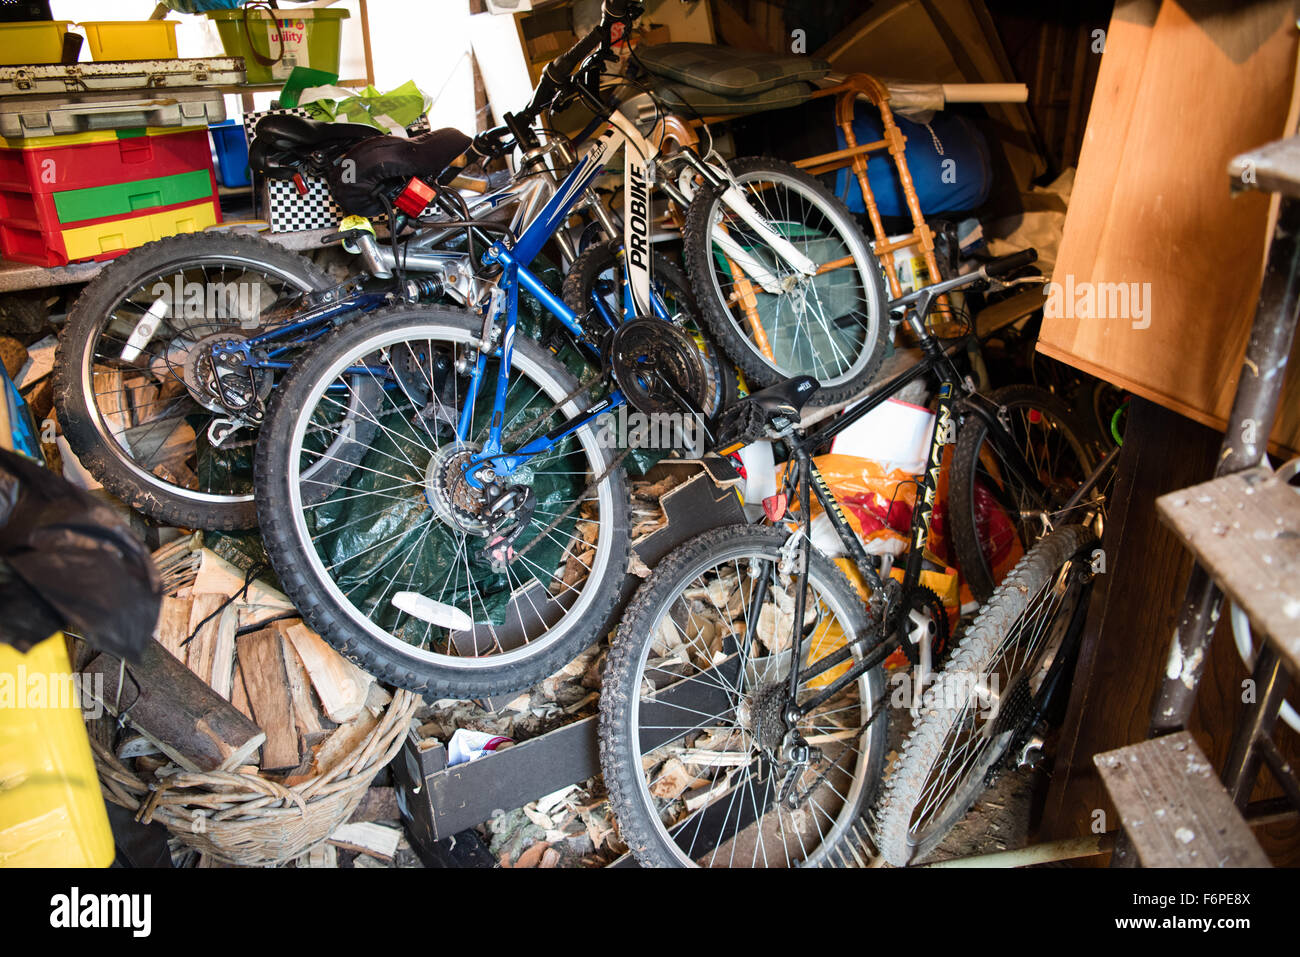 Inside a messy and cluttered wooden garage shed with tools, bikes and garden equipment piled up on uneven shelves in organised chaos Stock Photo